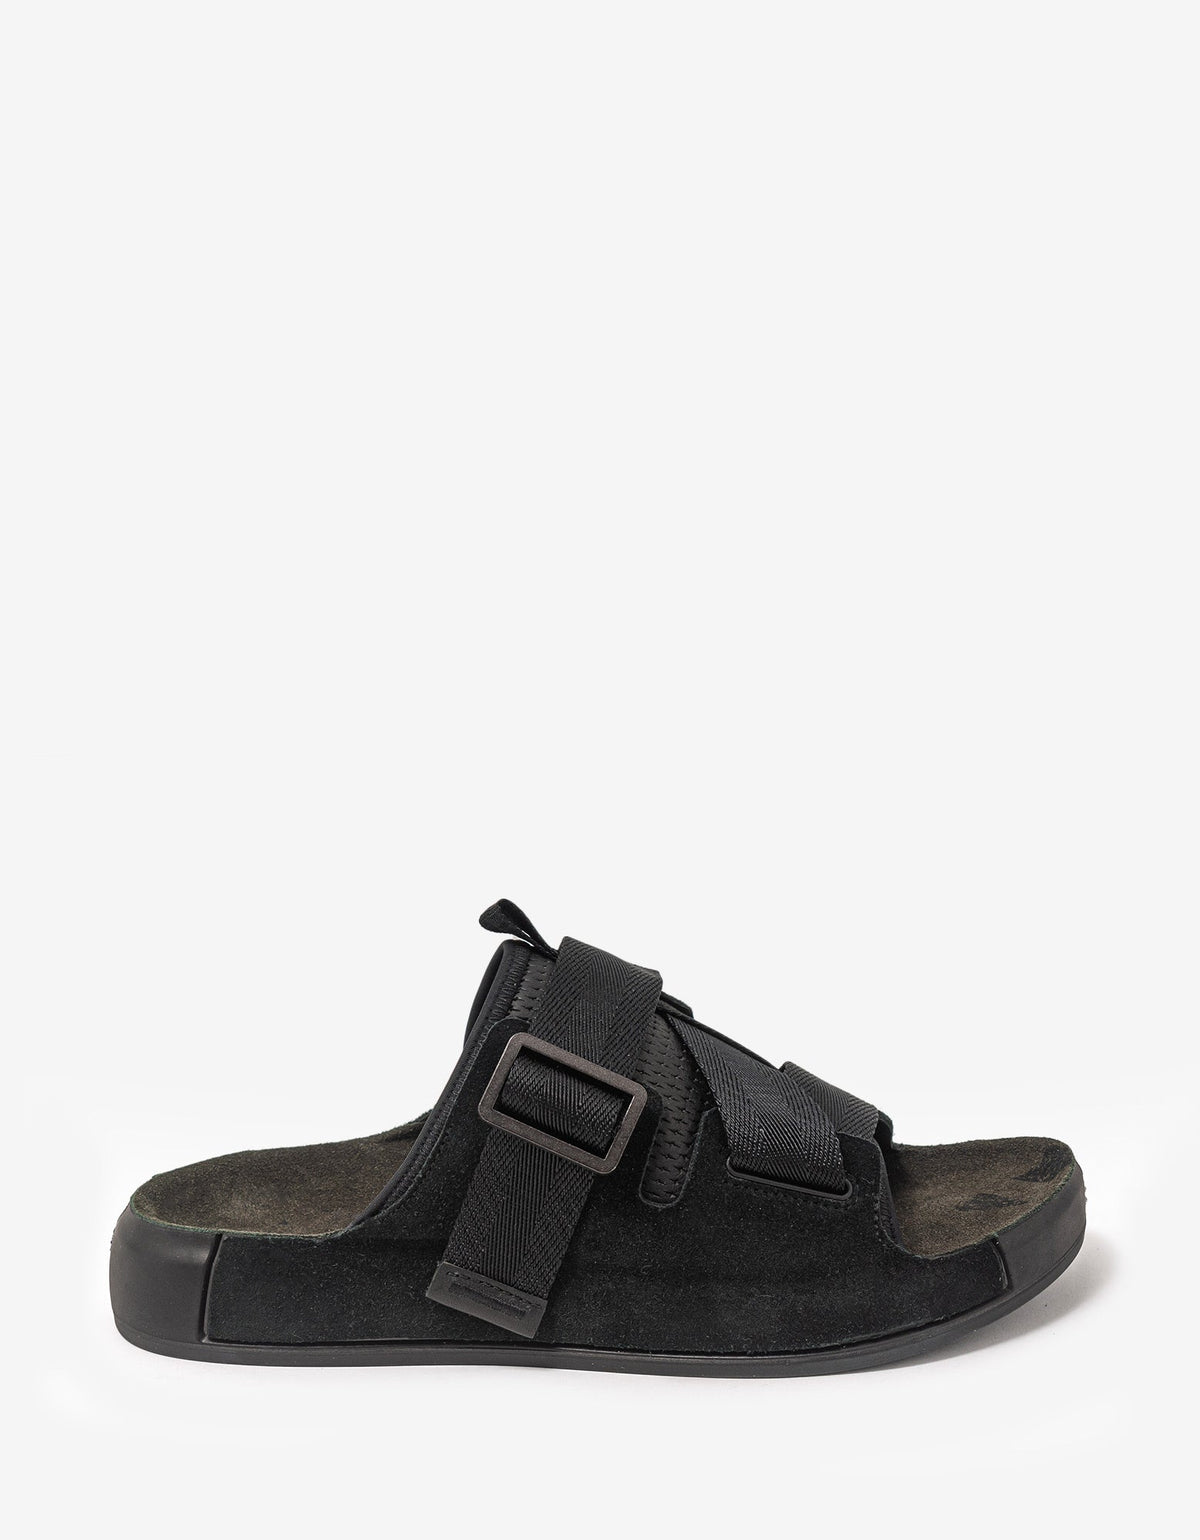 Stone Island Shadow Project Black Suede & Tape Sandals